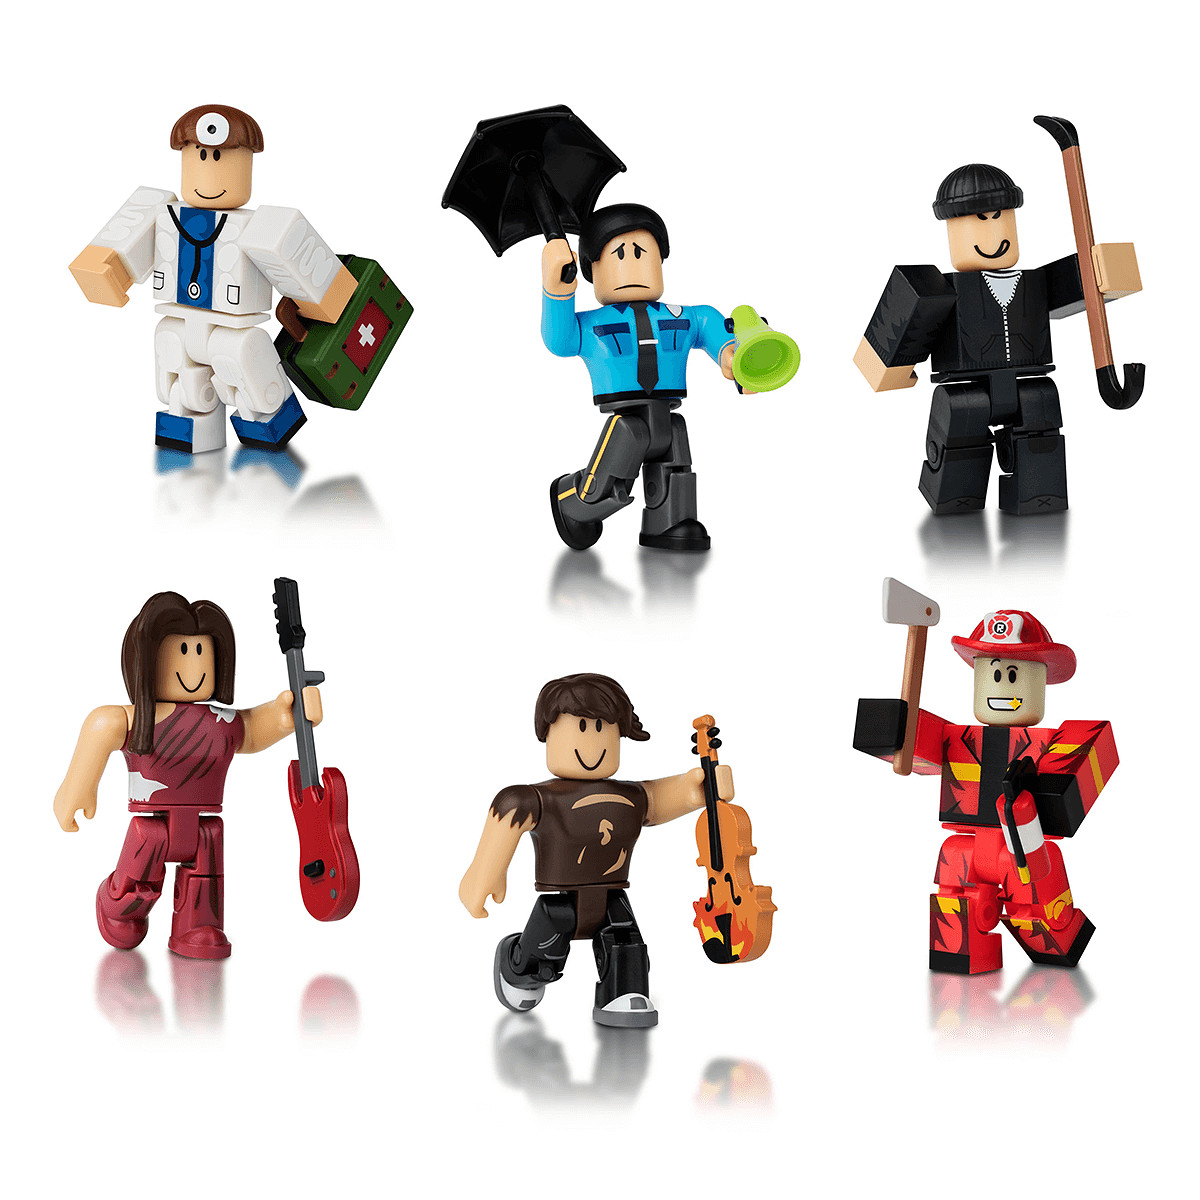 Roblox Citizens Of Roblox 6 Pack The Entertainer - asda roblox toys